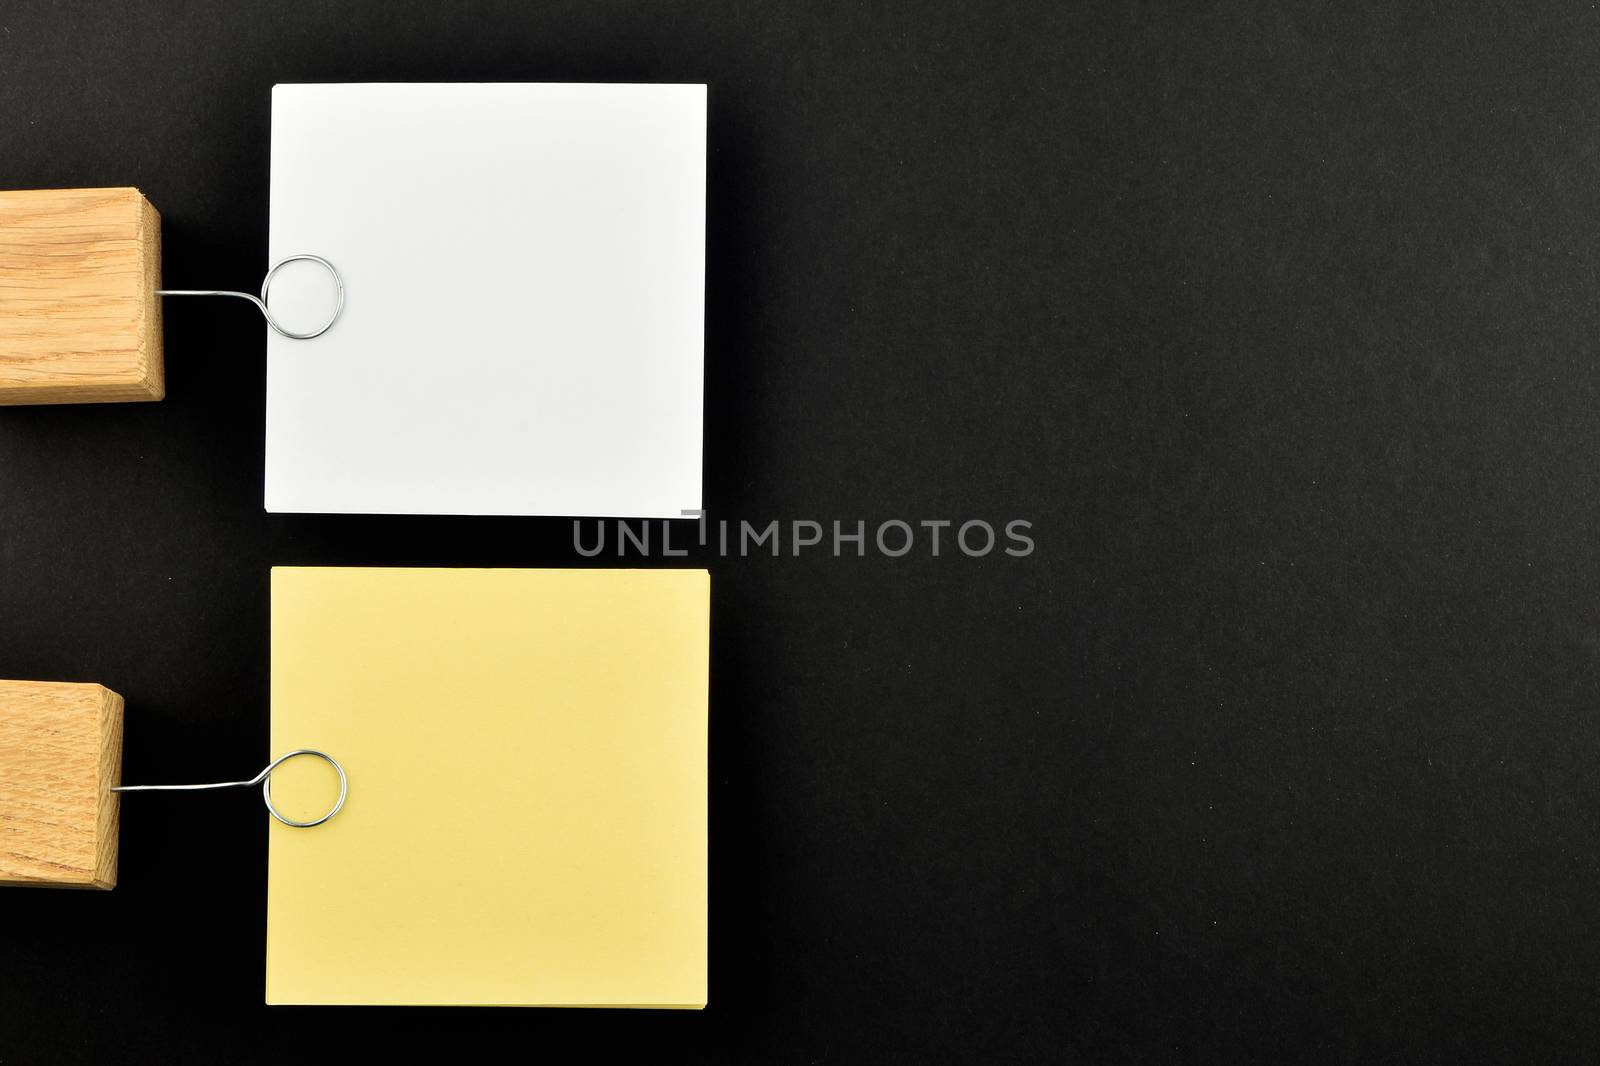 List, Two paper notes, white and yellow, with wooden holders isolated on black paper background for presentation